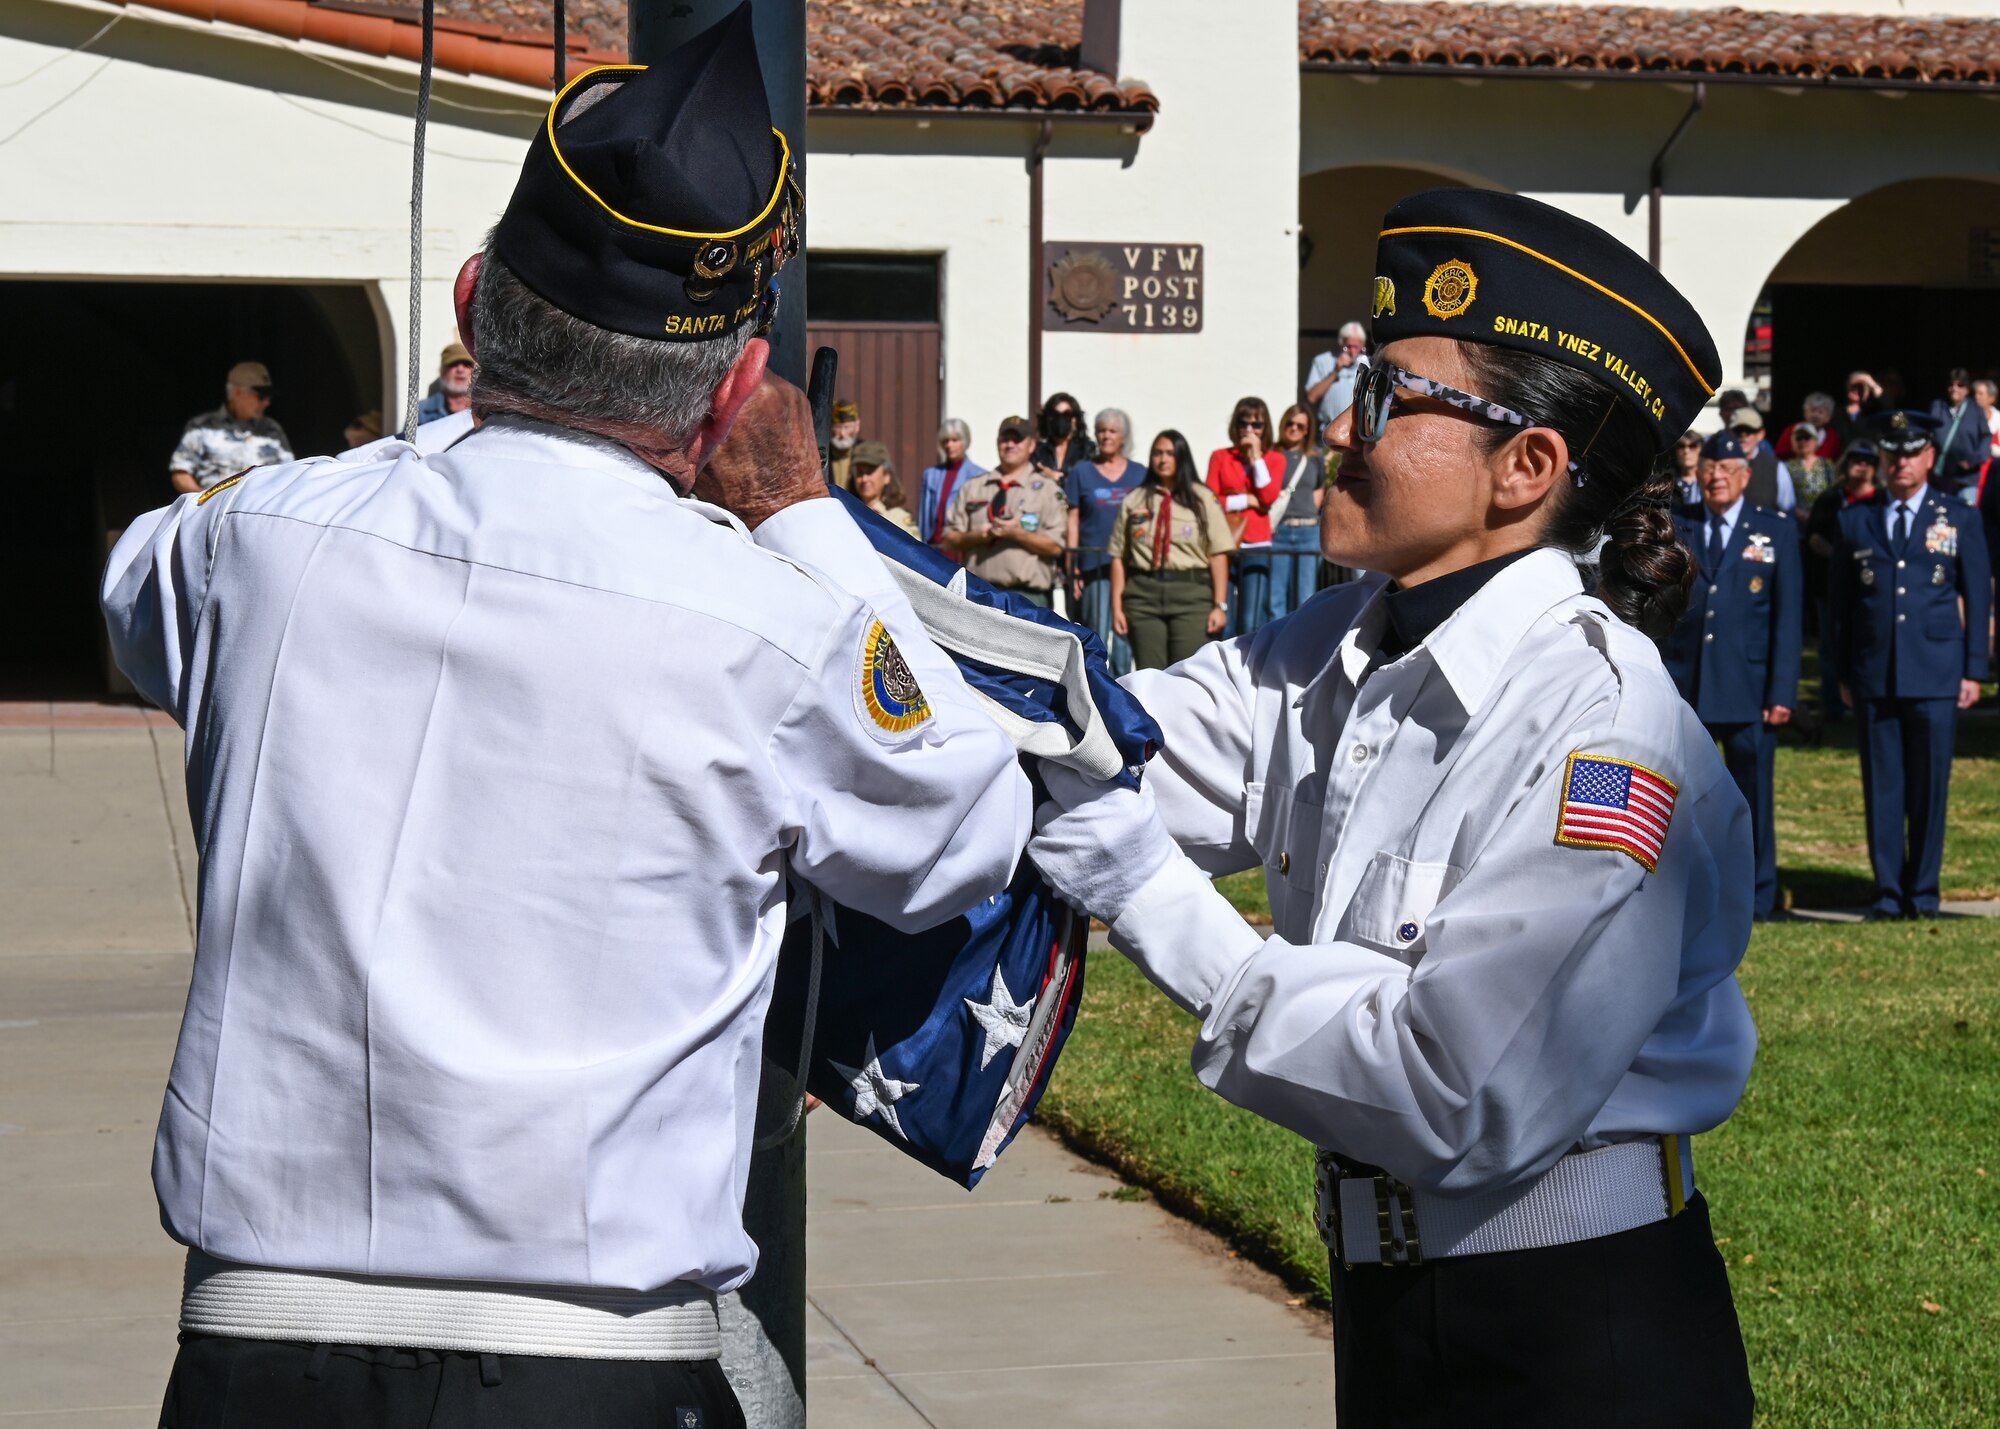 Members of the American Legion Post 534 present the American flag during the Veterans Day ceremony at the Solvang Veterans Memorial Hall.